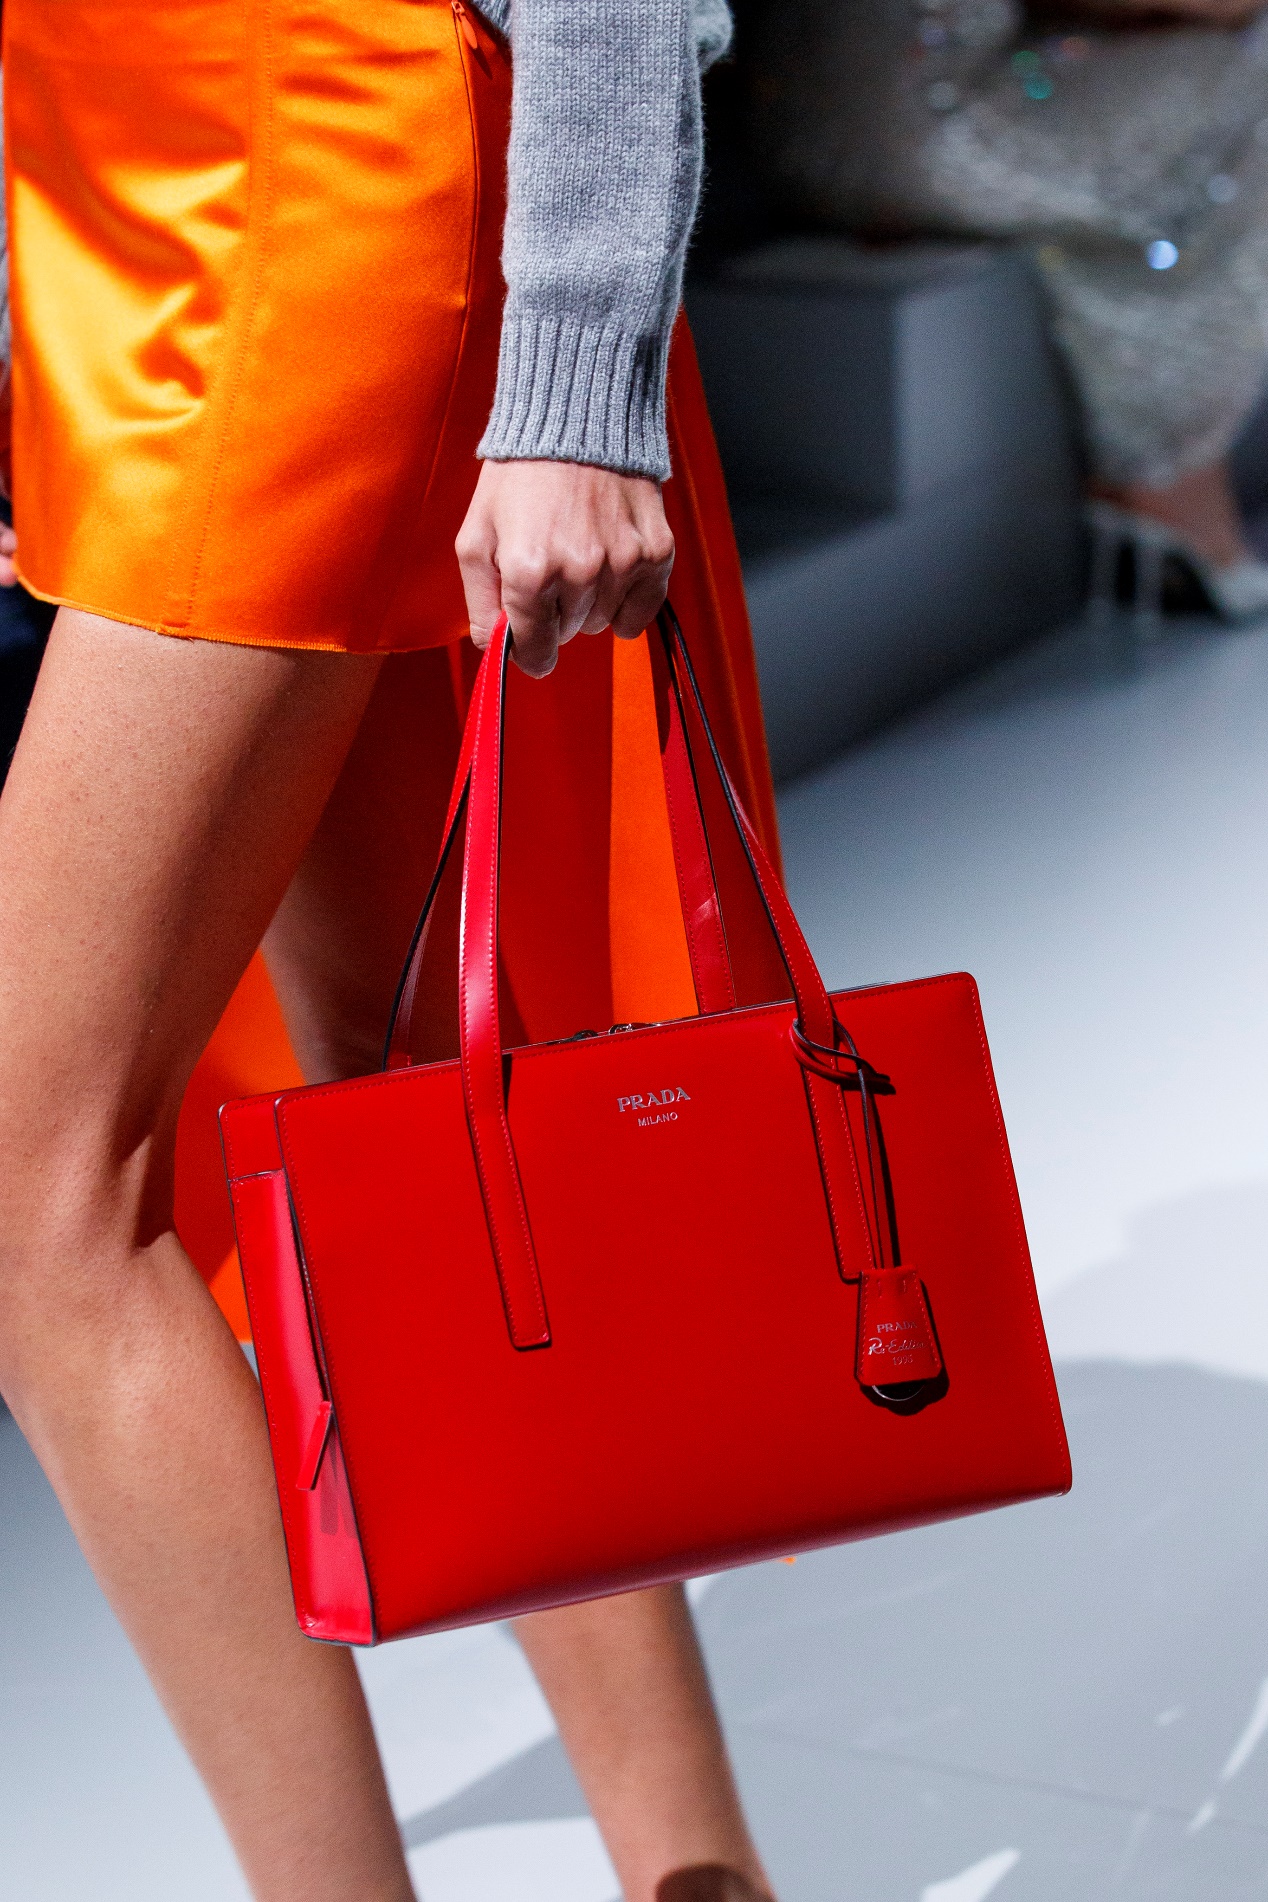 A person holding a red bag

Description automatically generated with low confidence